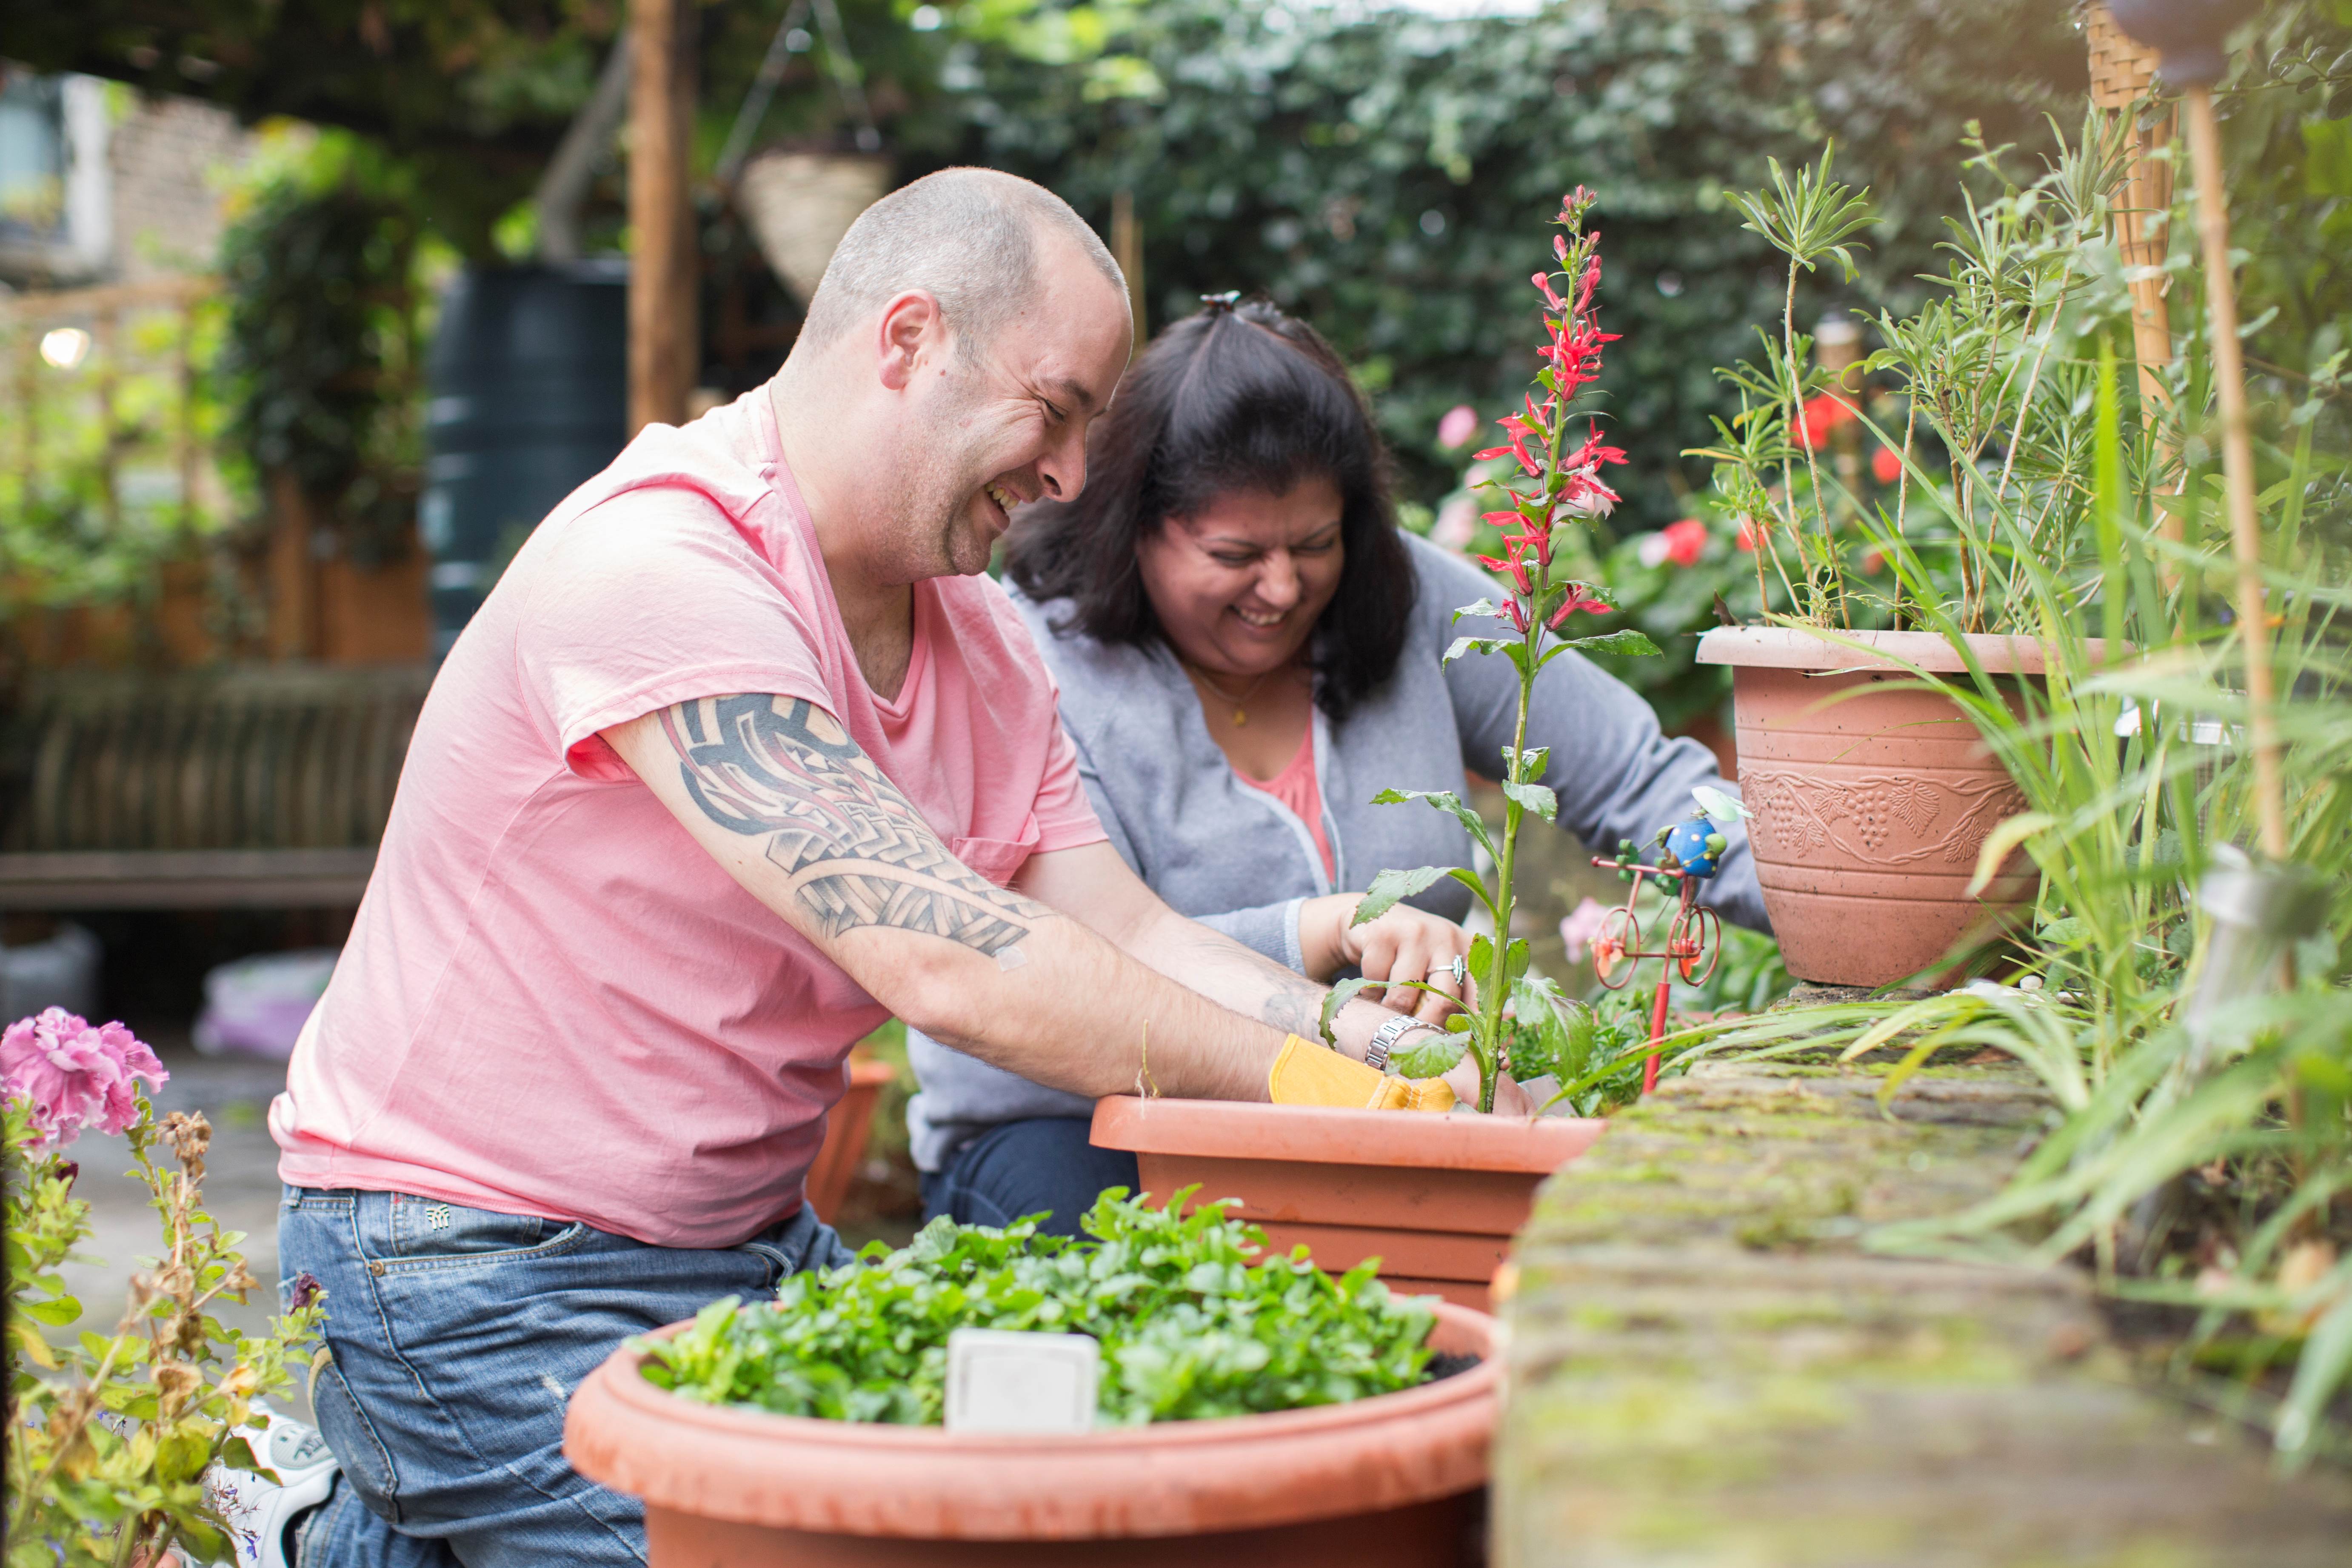 Man and woman gardening together